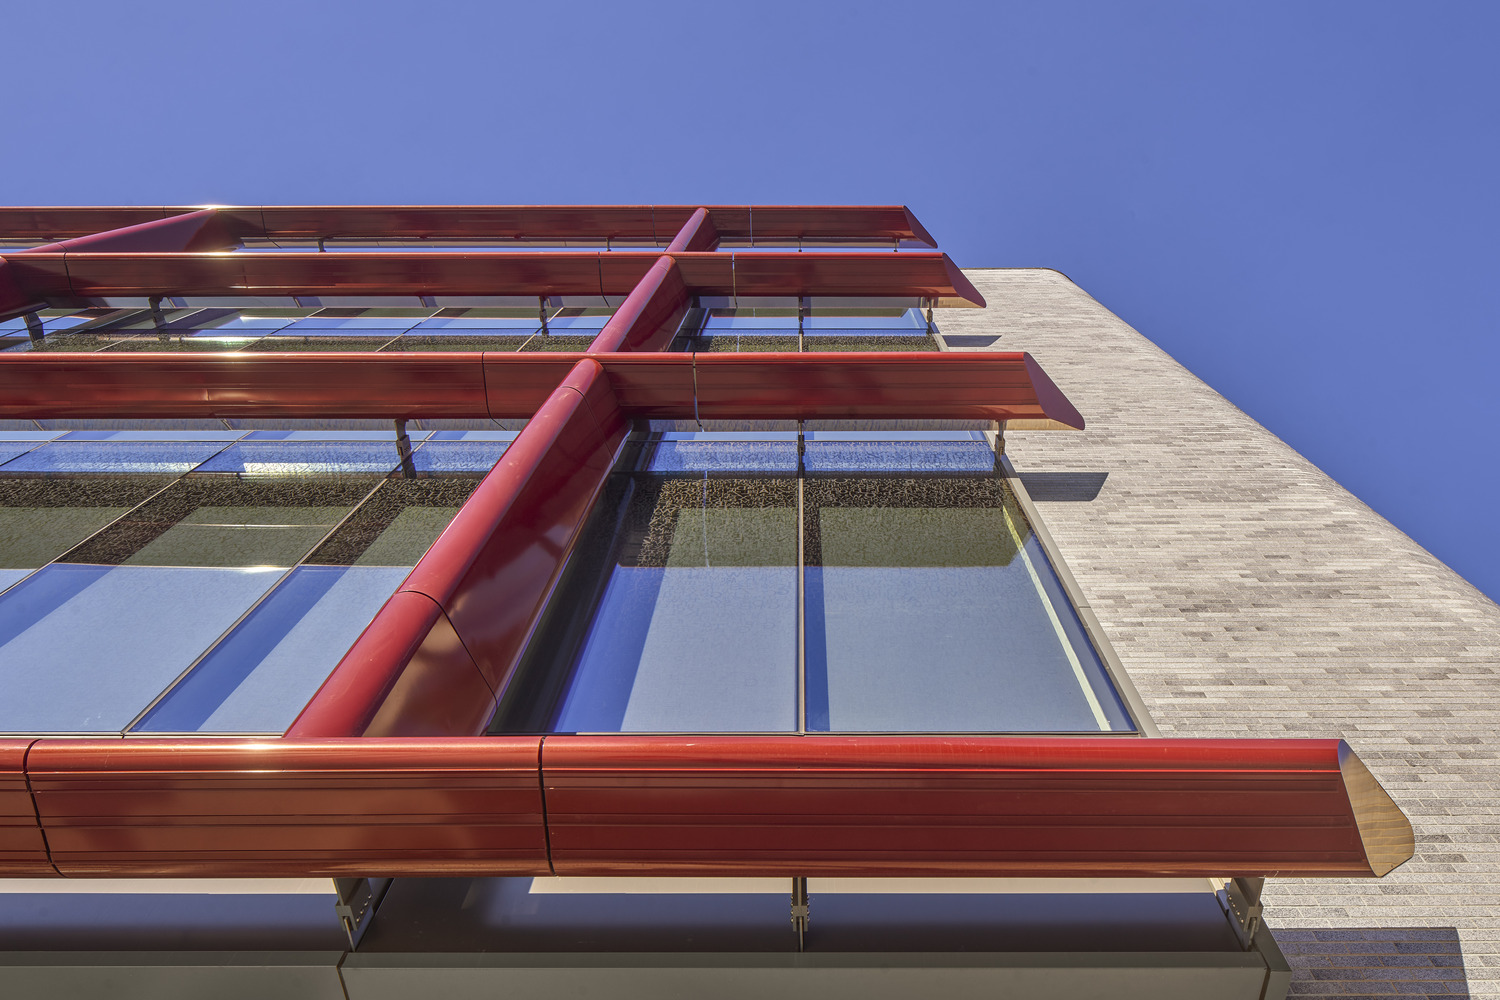 <p>The new east facade with its outboard aluminum frame finished in a glossy red powder coating, custom formulated for this installation, projects a dynamic new image for the building in conversation with the original design.<small> | &copy; Halkin Mason Photography</small></p>